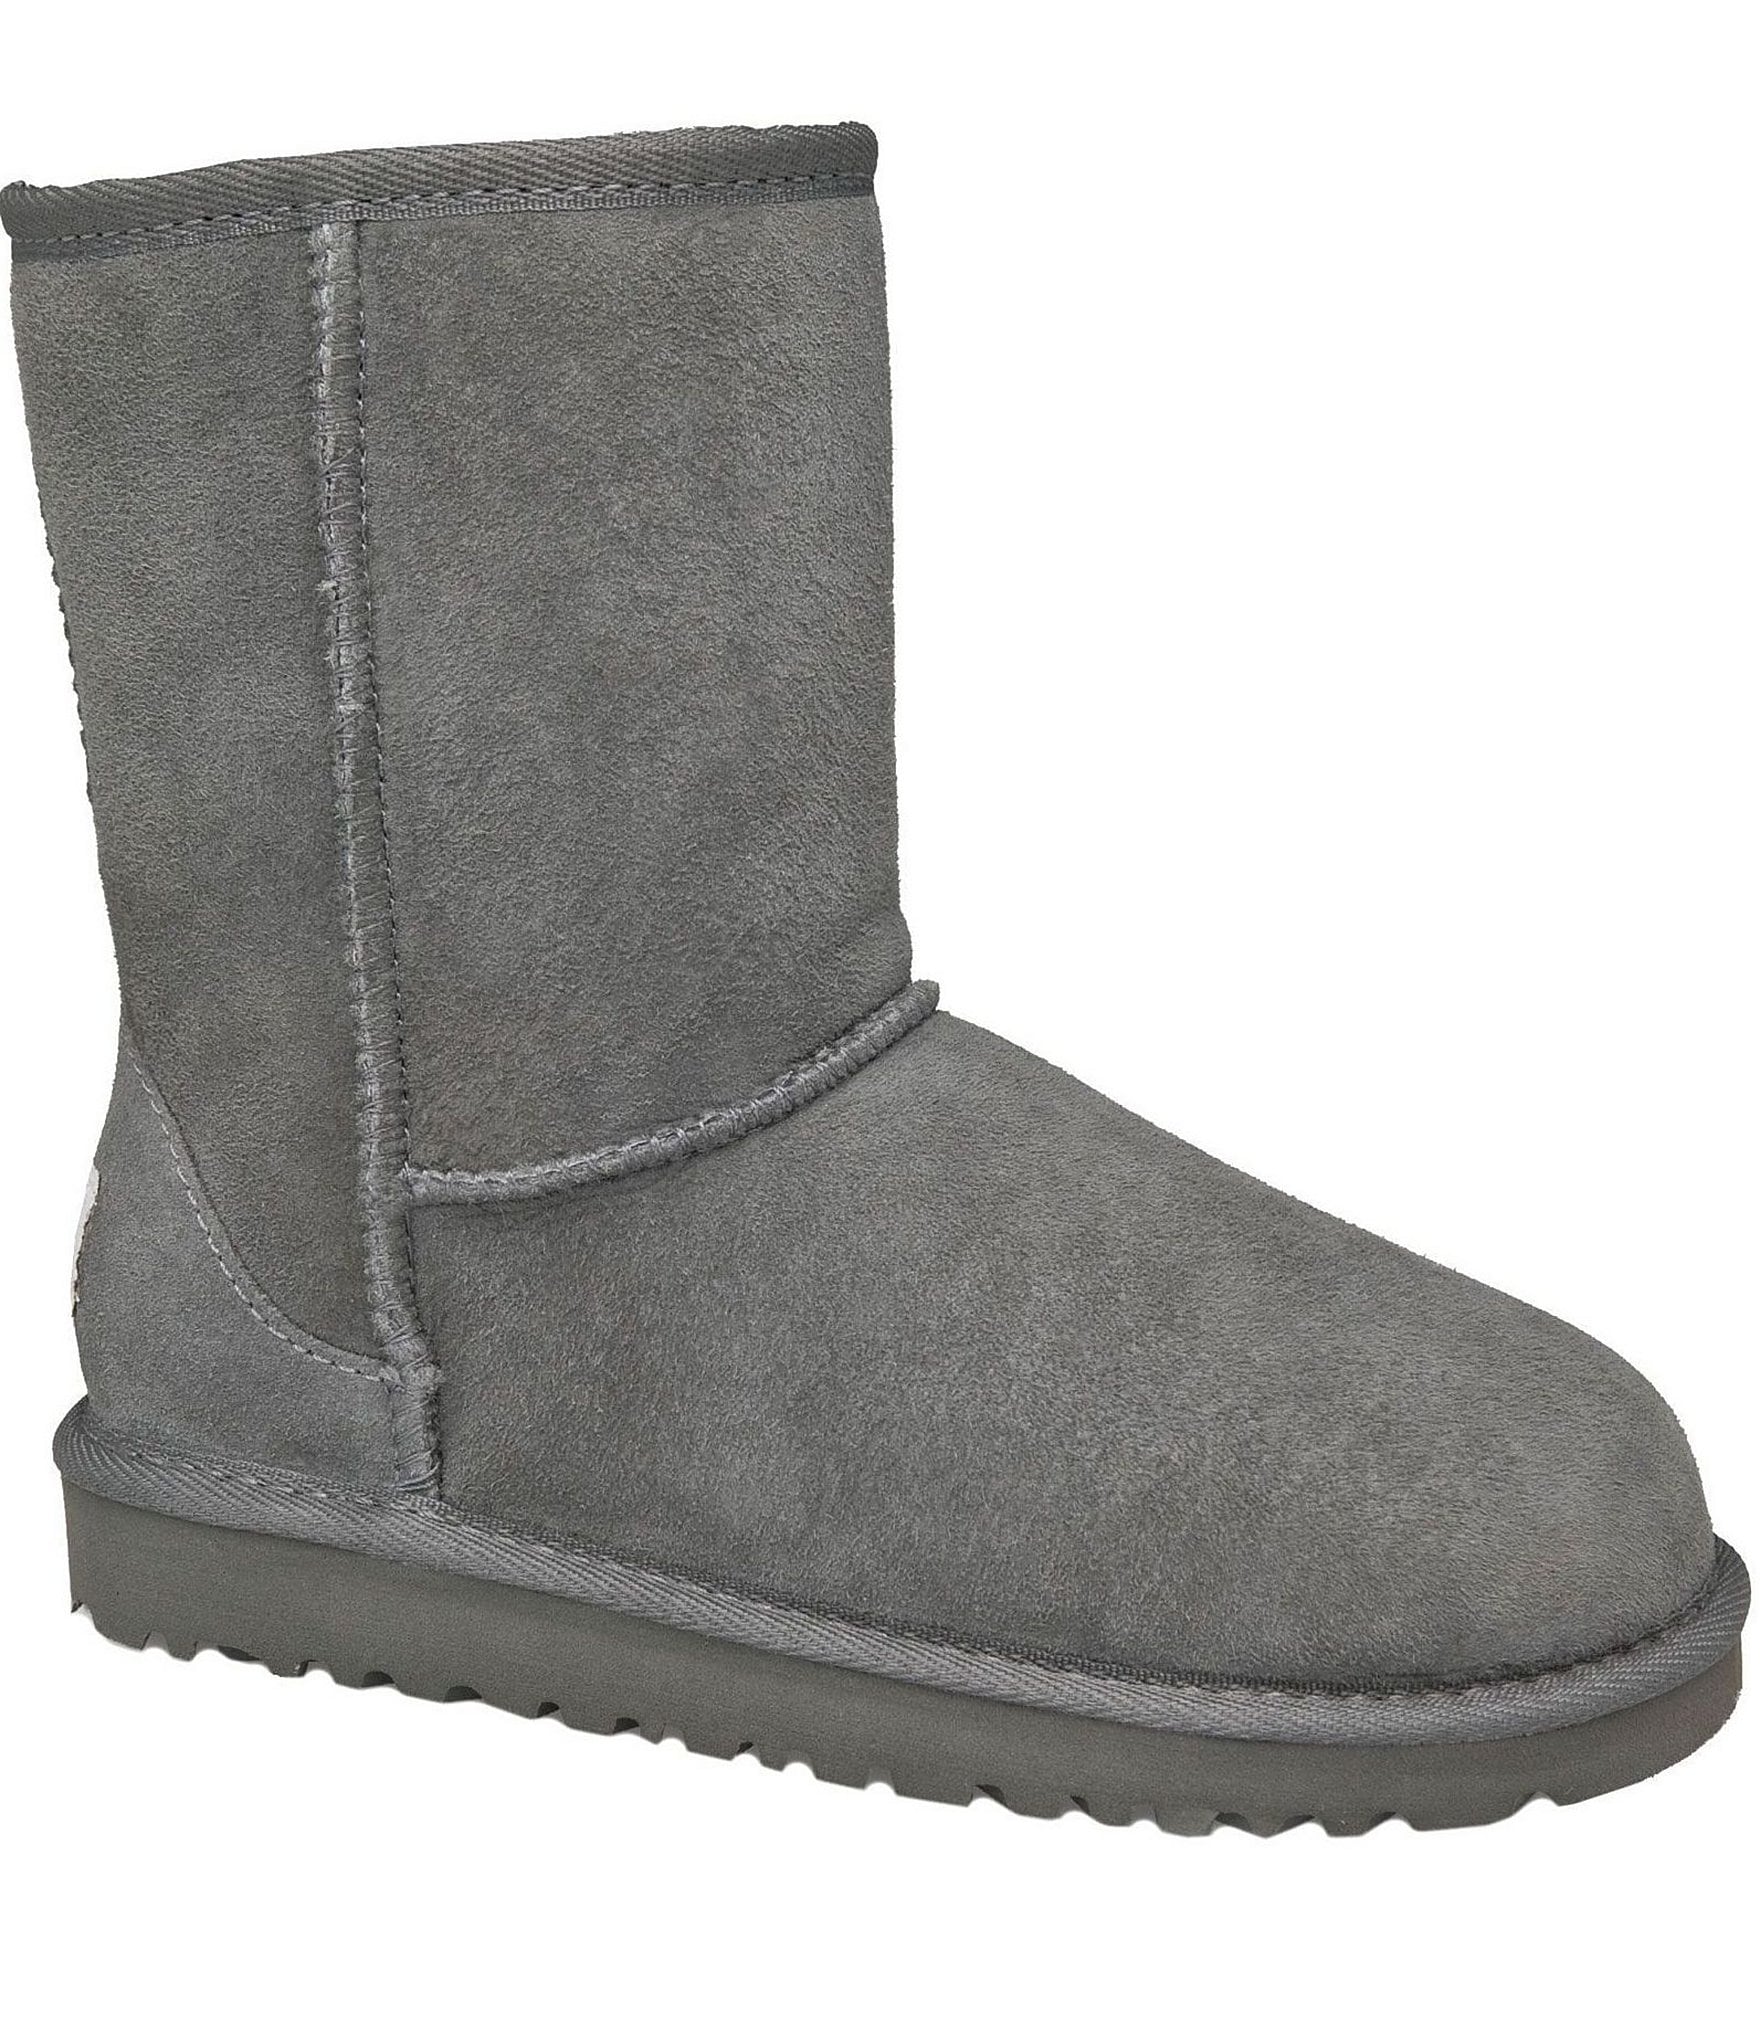 Dillards Uggs Womens Boots | Division of Global Affairs